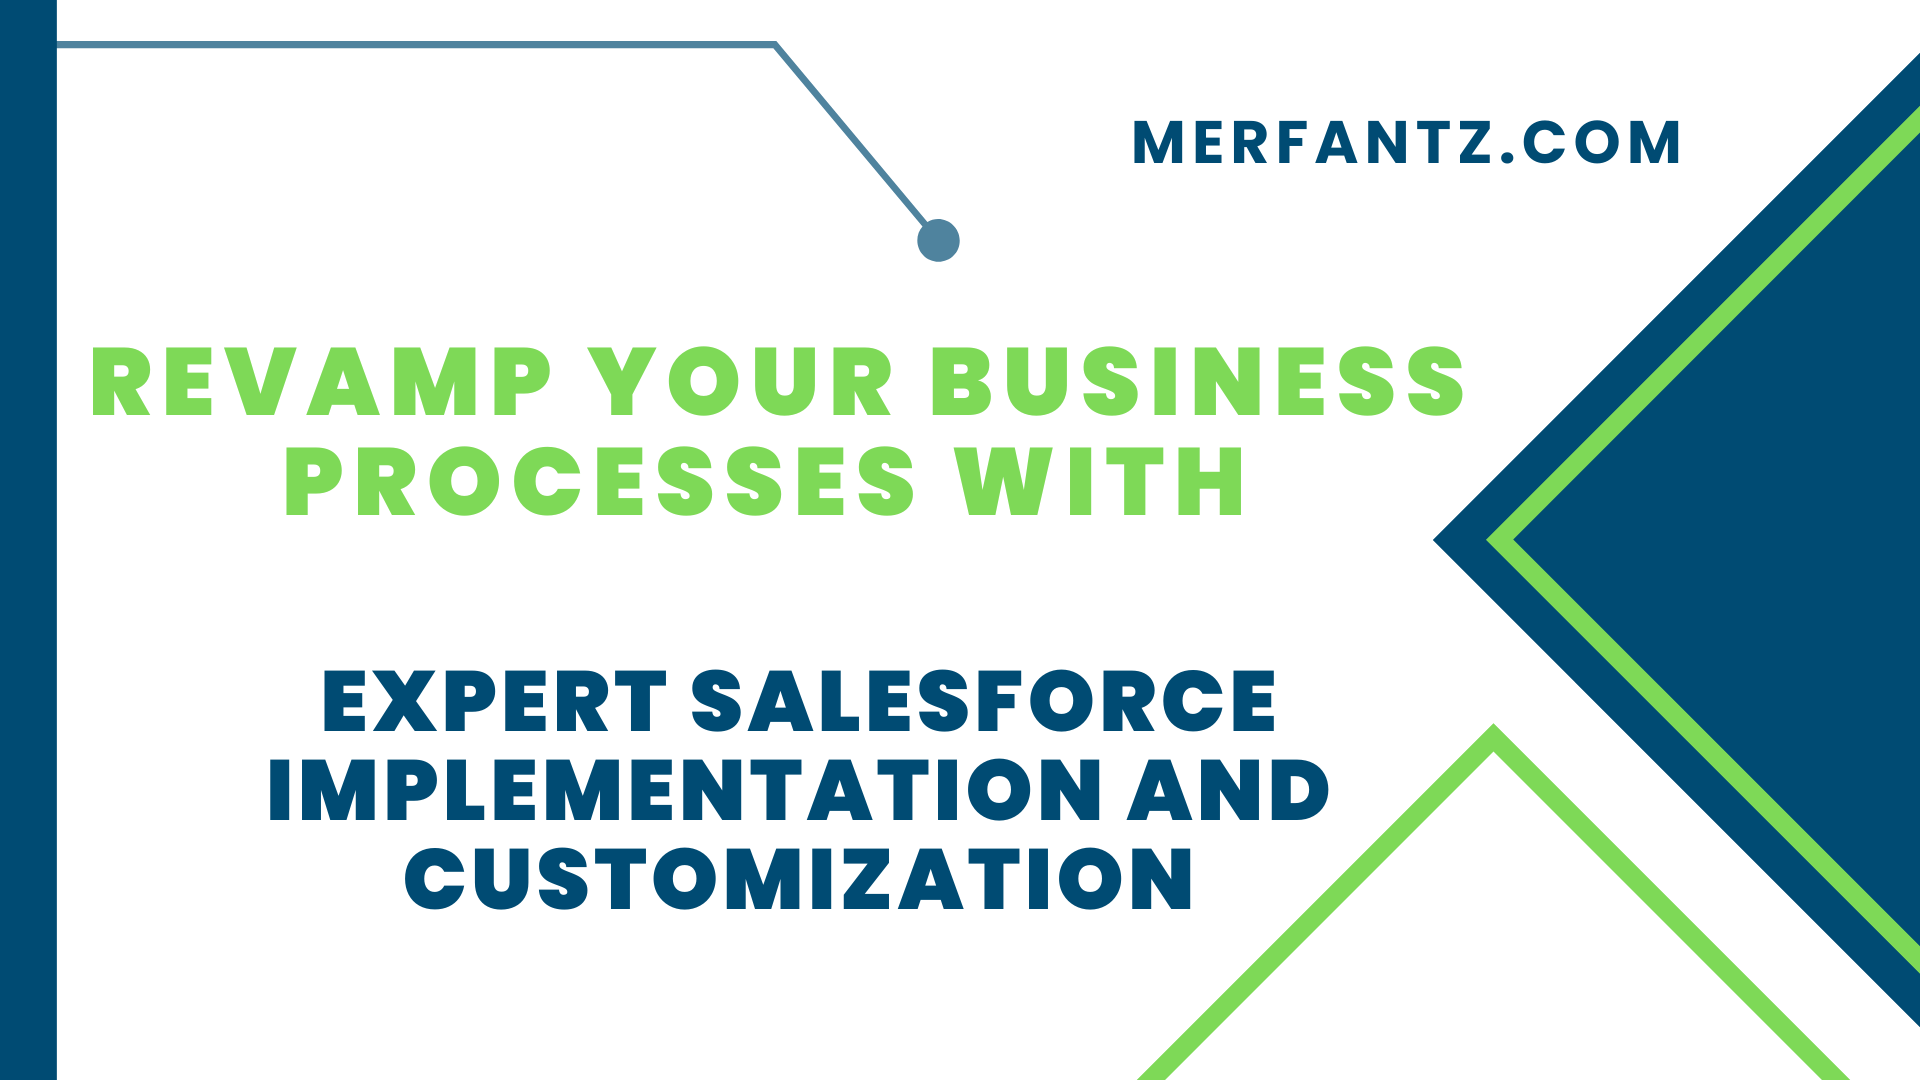 Revamp Your Business Processes with Salesforce Implementation and Customization